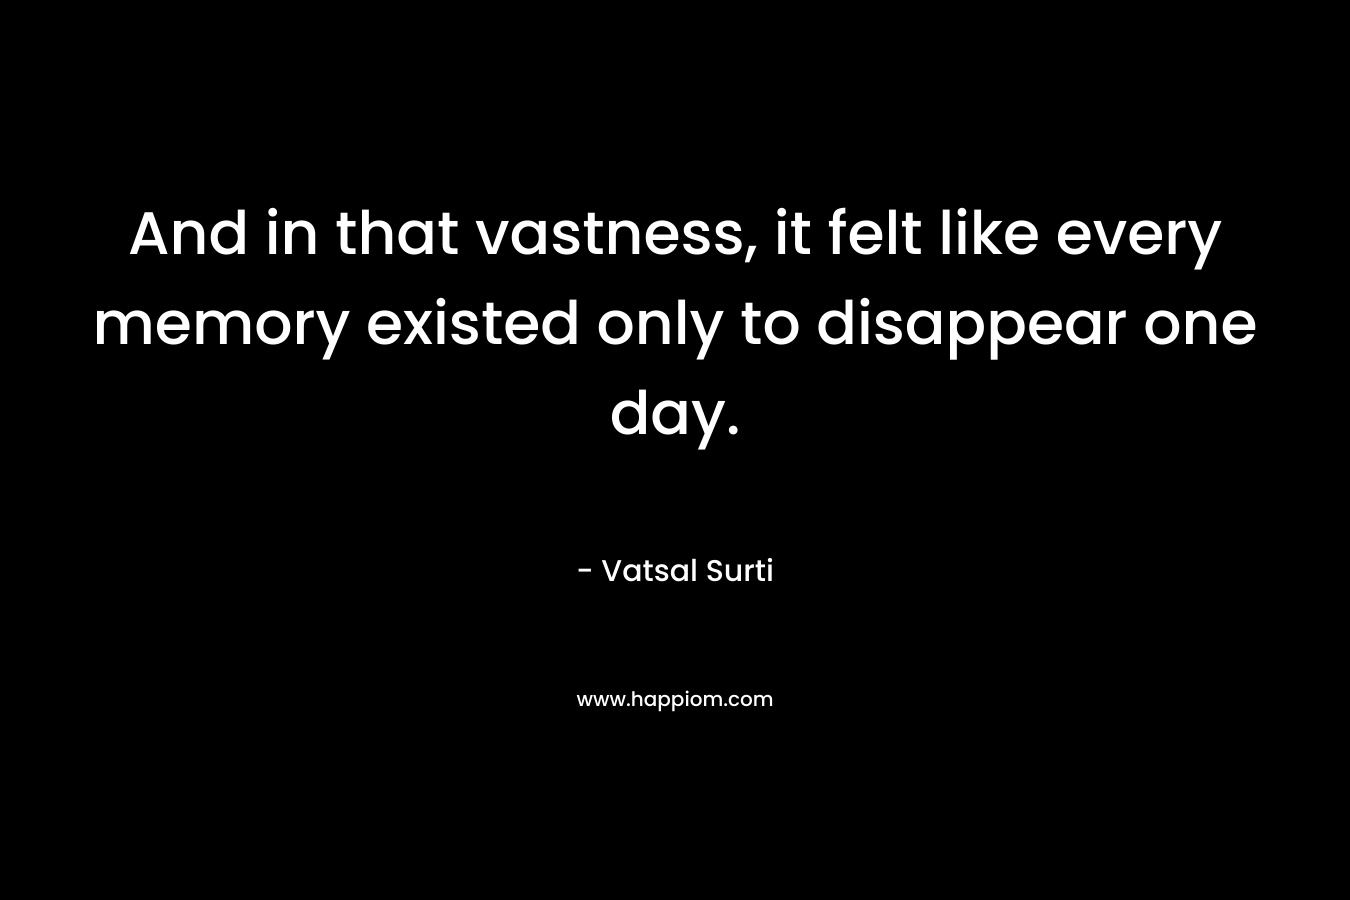 And in that vastness, it felt like every memory existed only to disappear one day. – Vatsal Surti